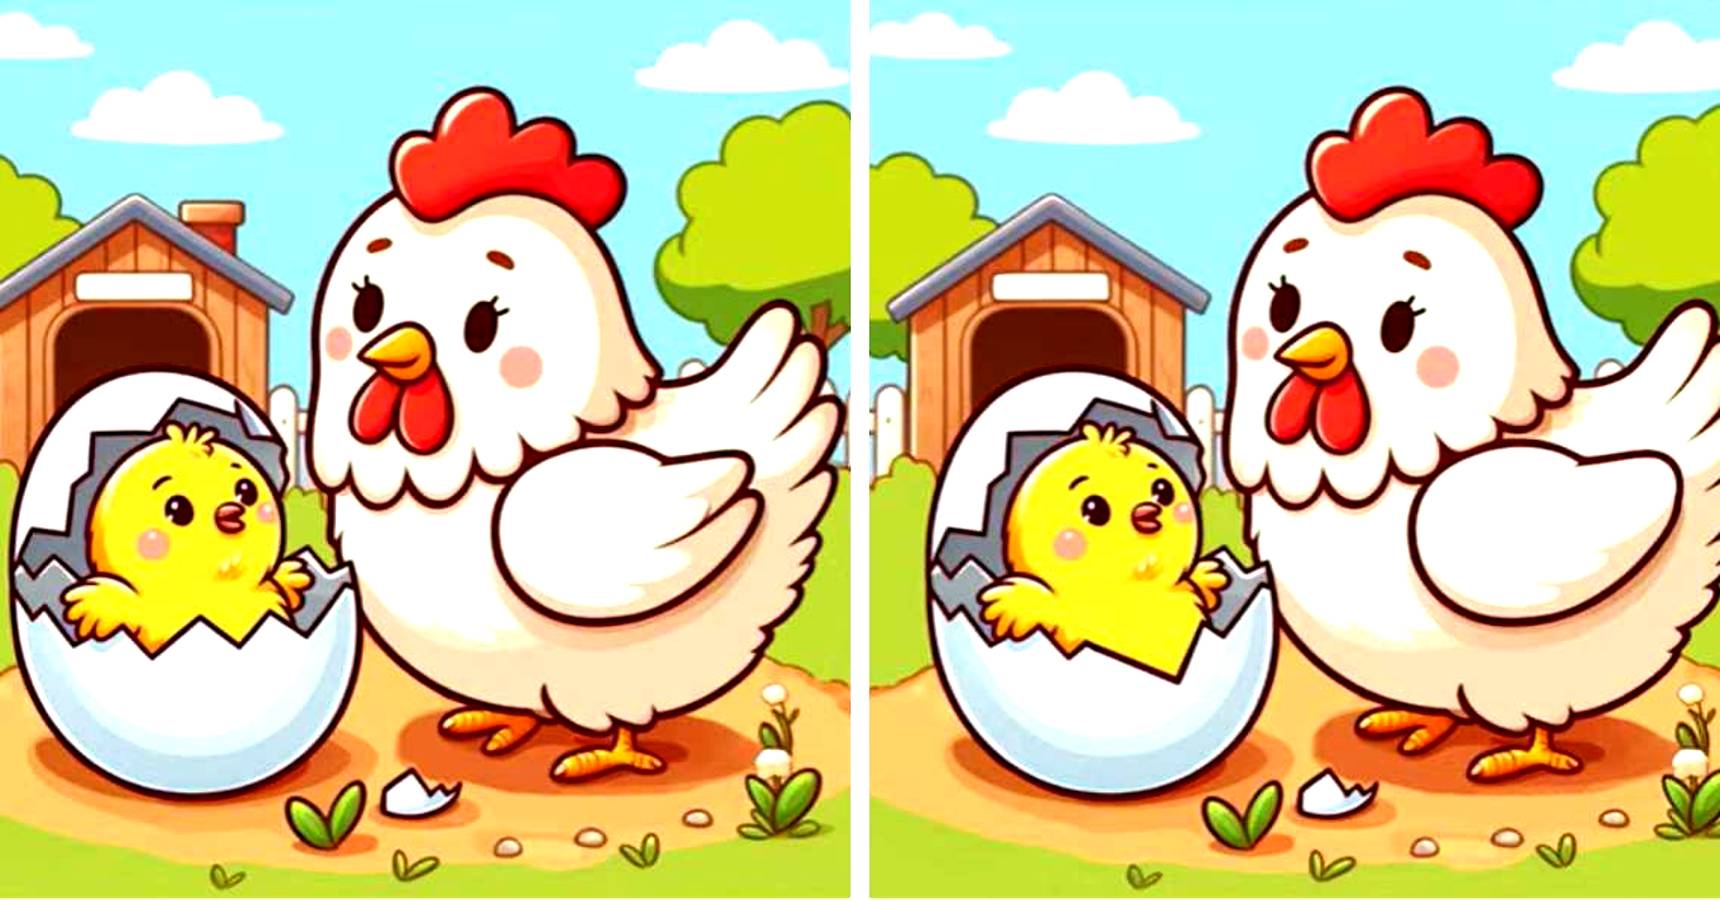 Optical illusion spot 3 differences between hen and hatchling pictures within 12 seconds